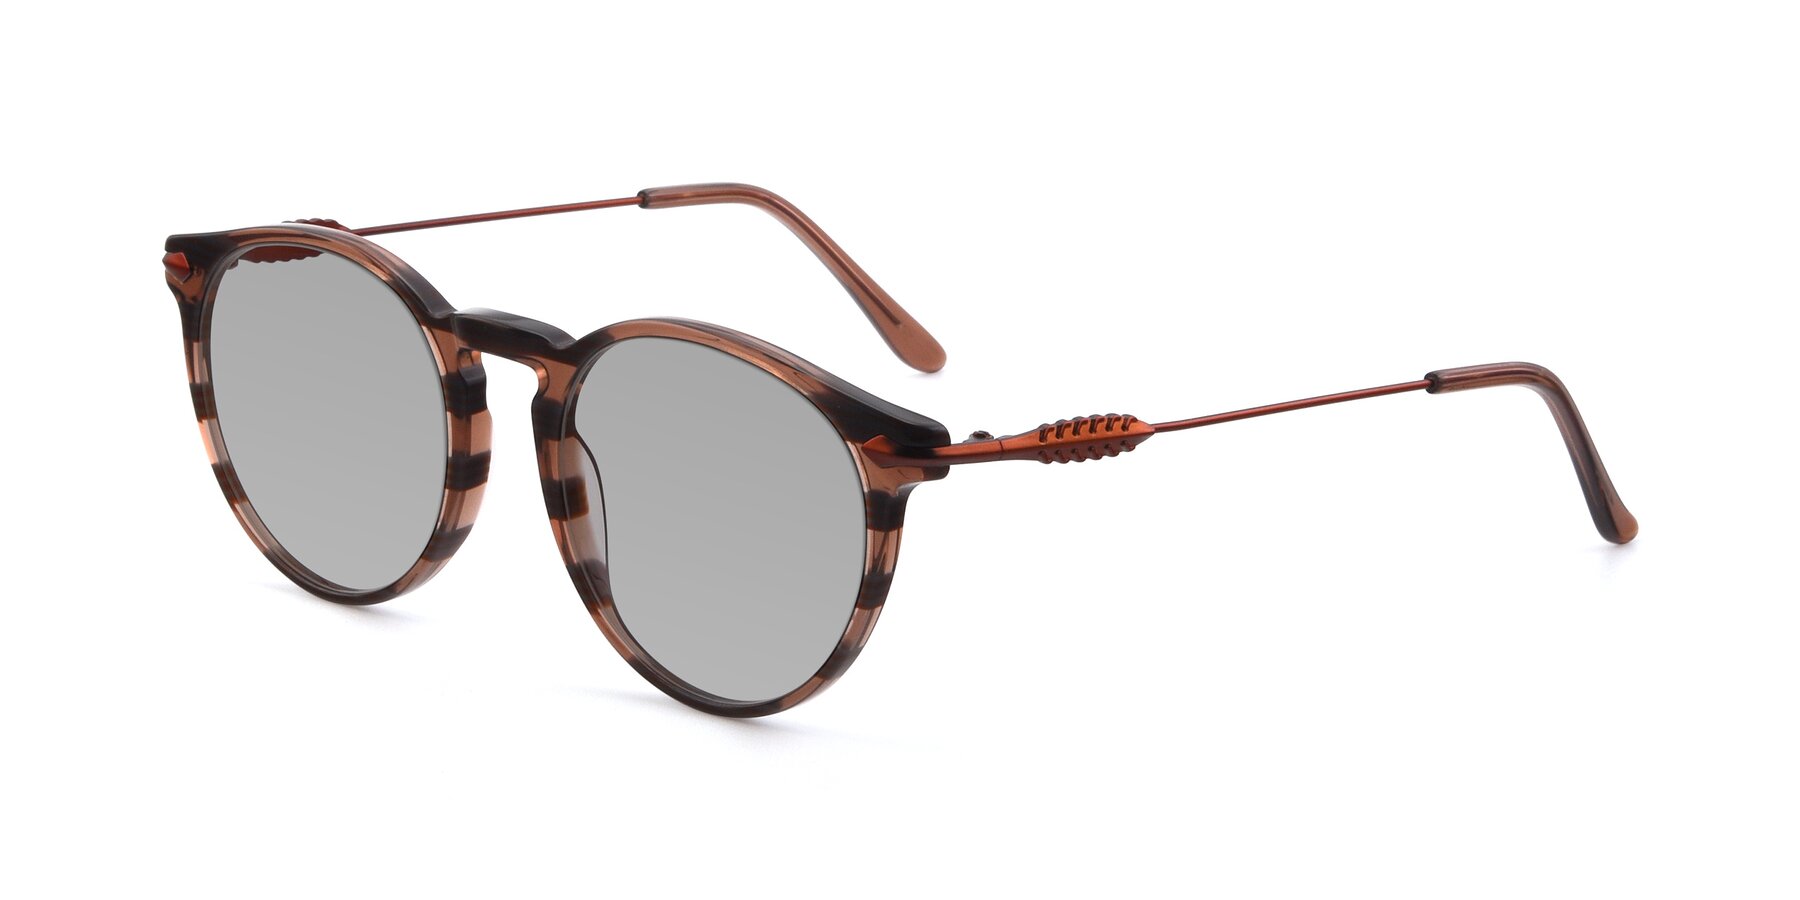 Angle of 17660 in Stripe Brown with Light Gray Tinted Lenses